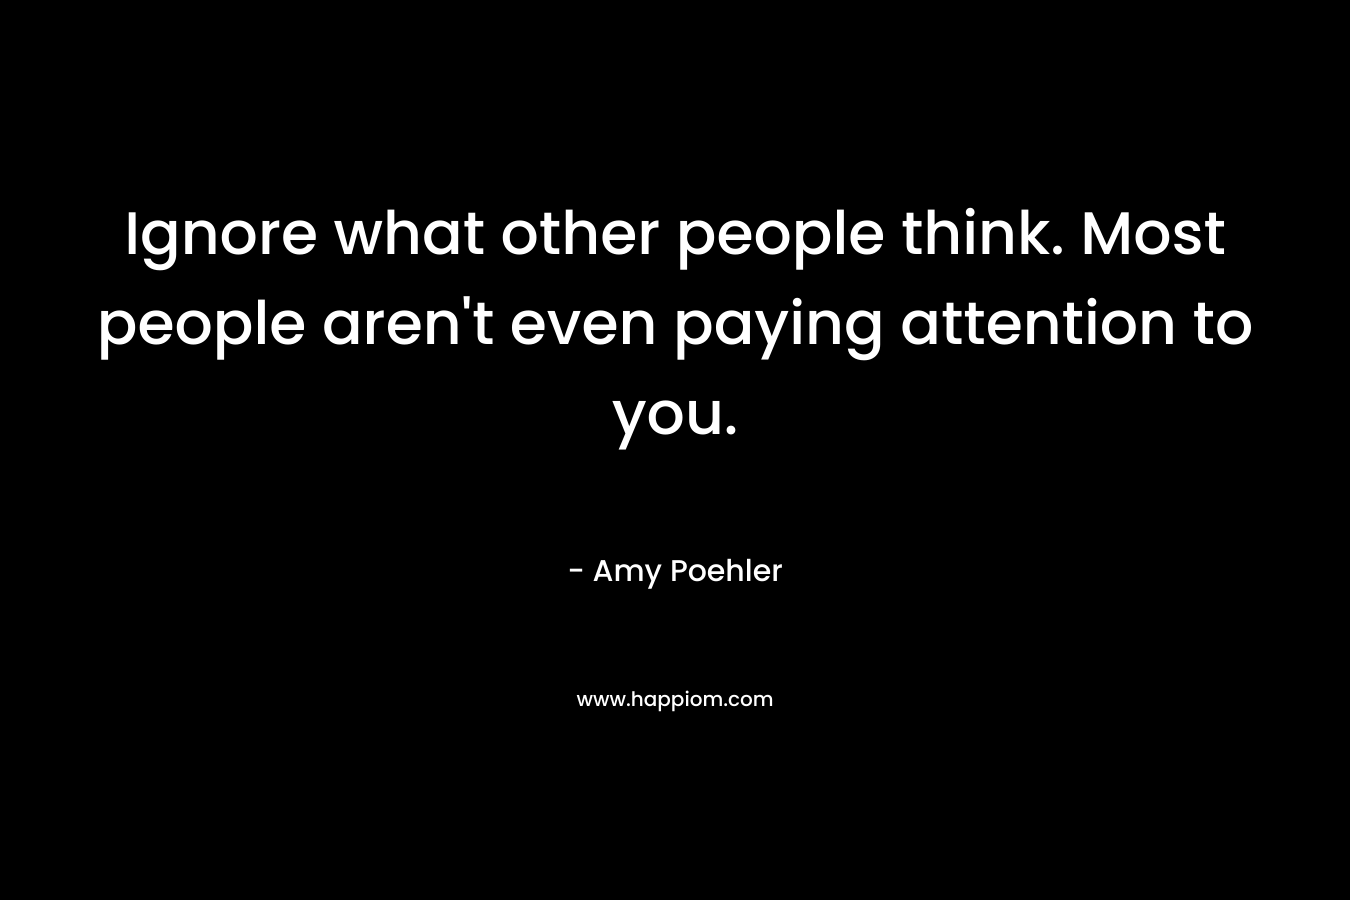 Ignore what other people think. Most people aren't even paying attention to you.